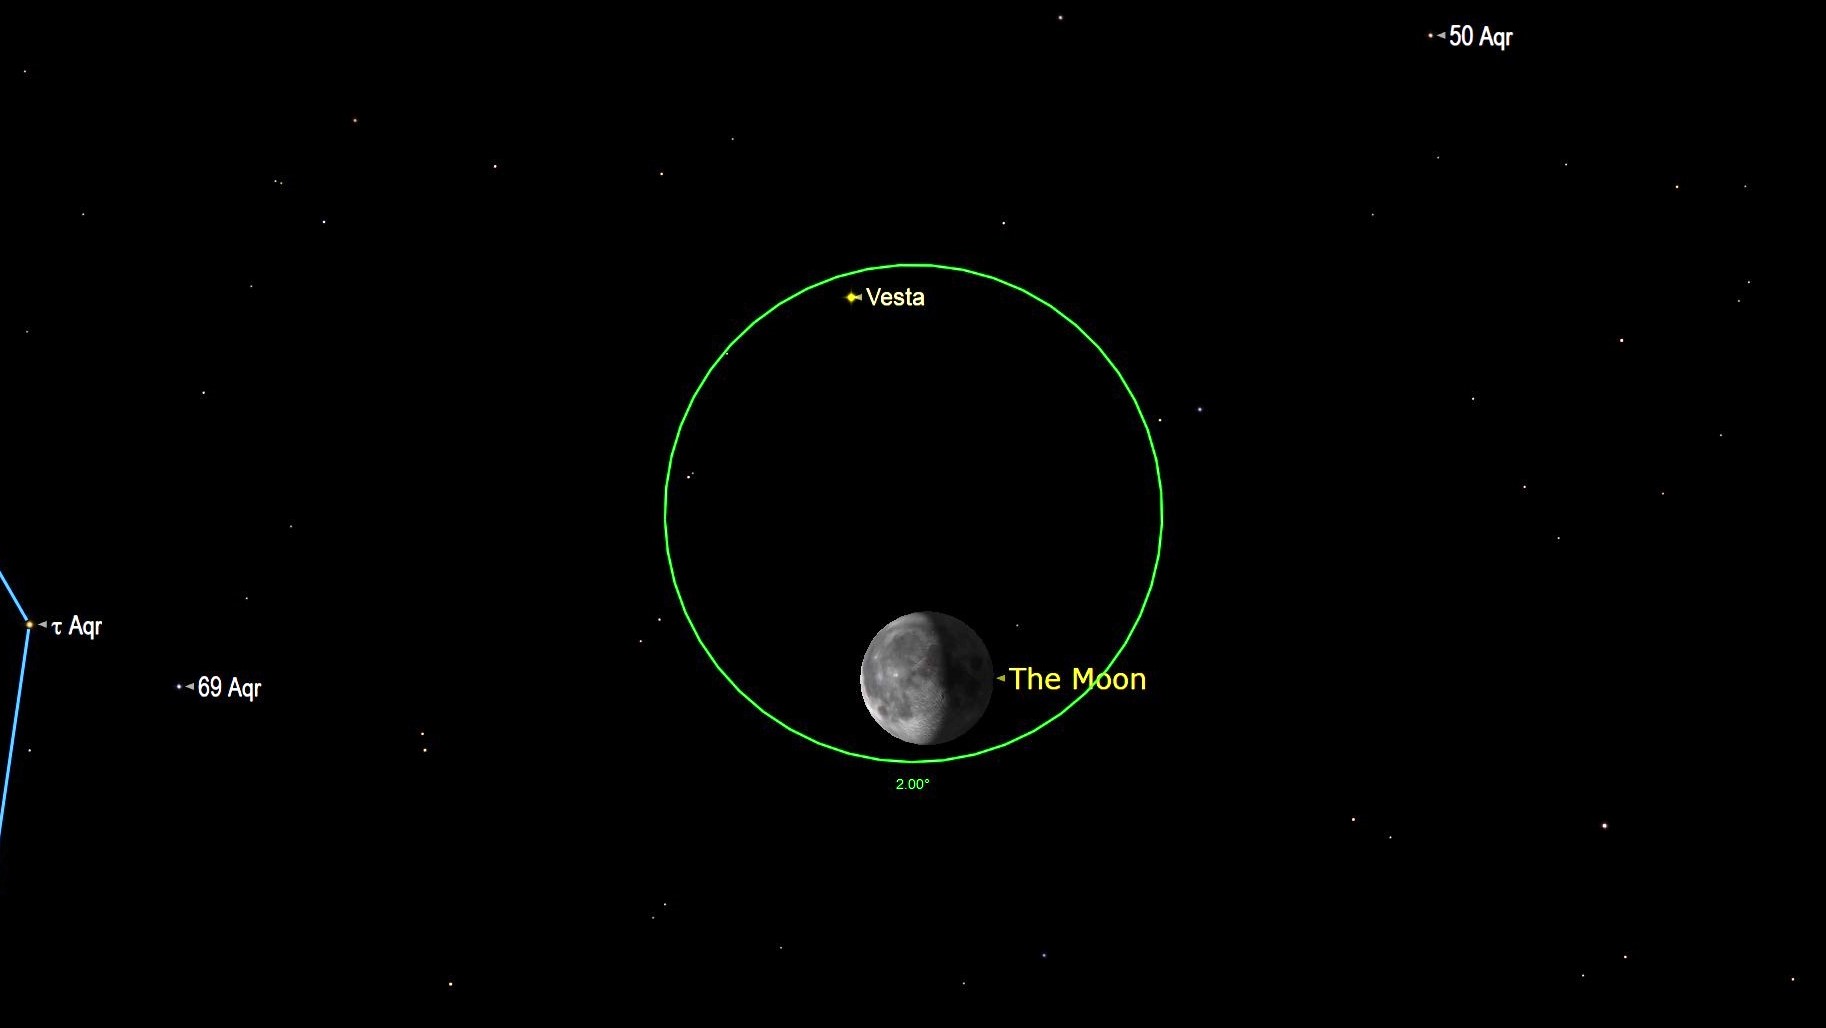 Graphic showing the moon and Vesta in close proximity to each other in the night sky.